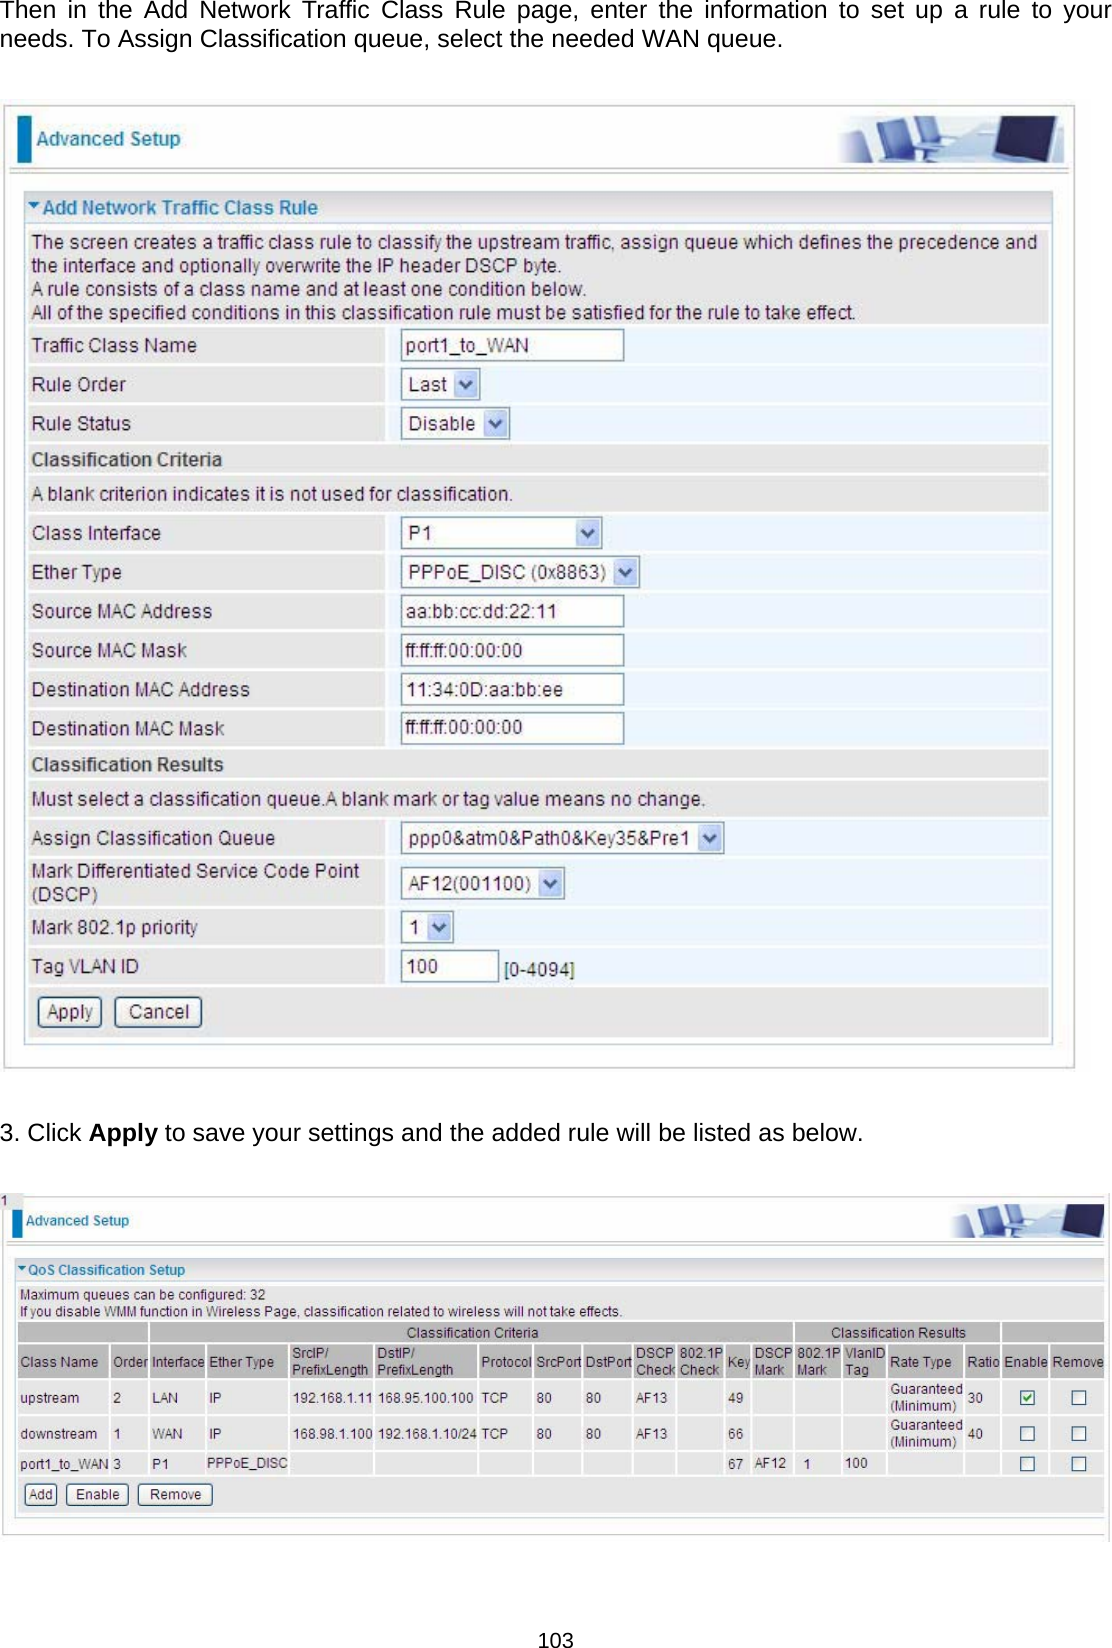  103 Then in the Add Network Traffic Class Rule page, enter the information to set up a rule to your needs. To Assign Classification queue, select the needed WAN queue.     3. Click Apply to save your settings and the added rule will be listed as below.  